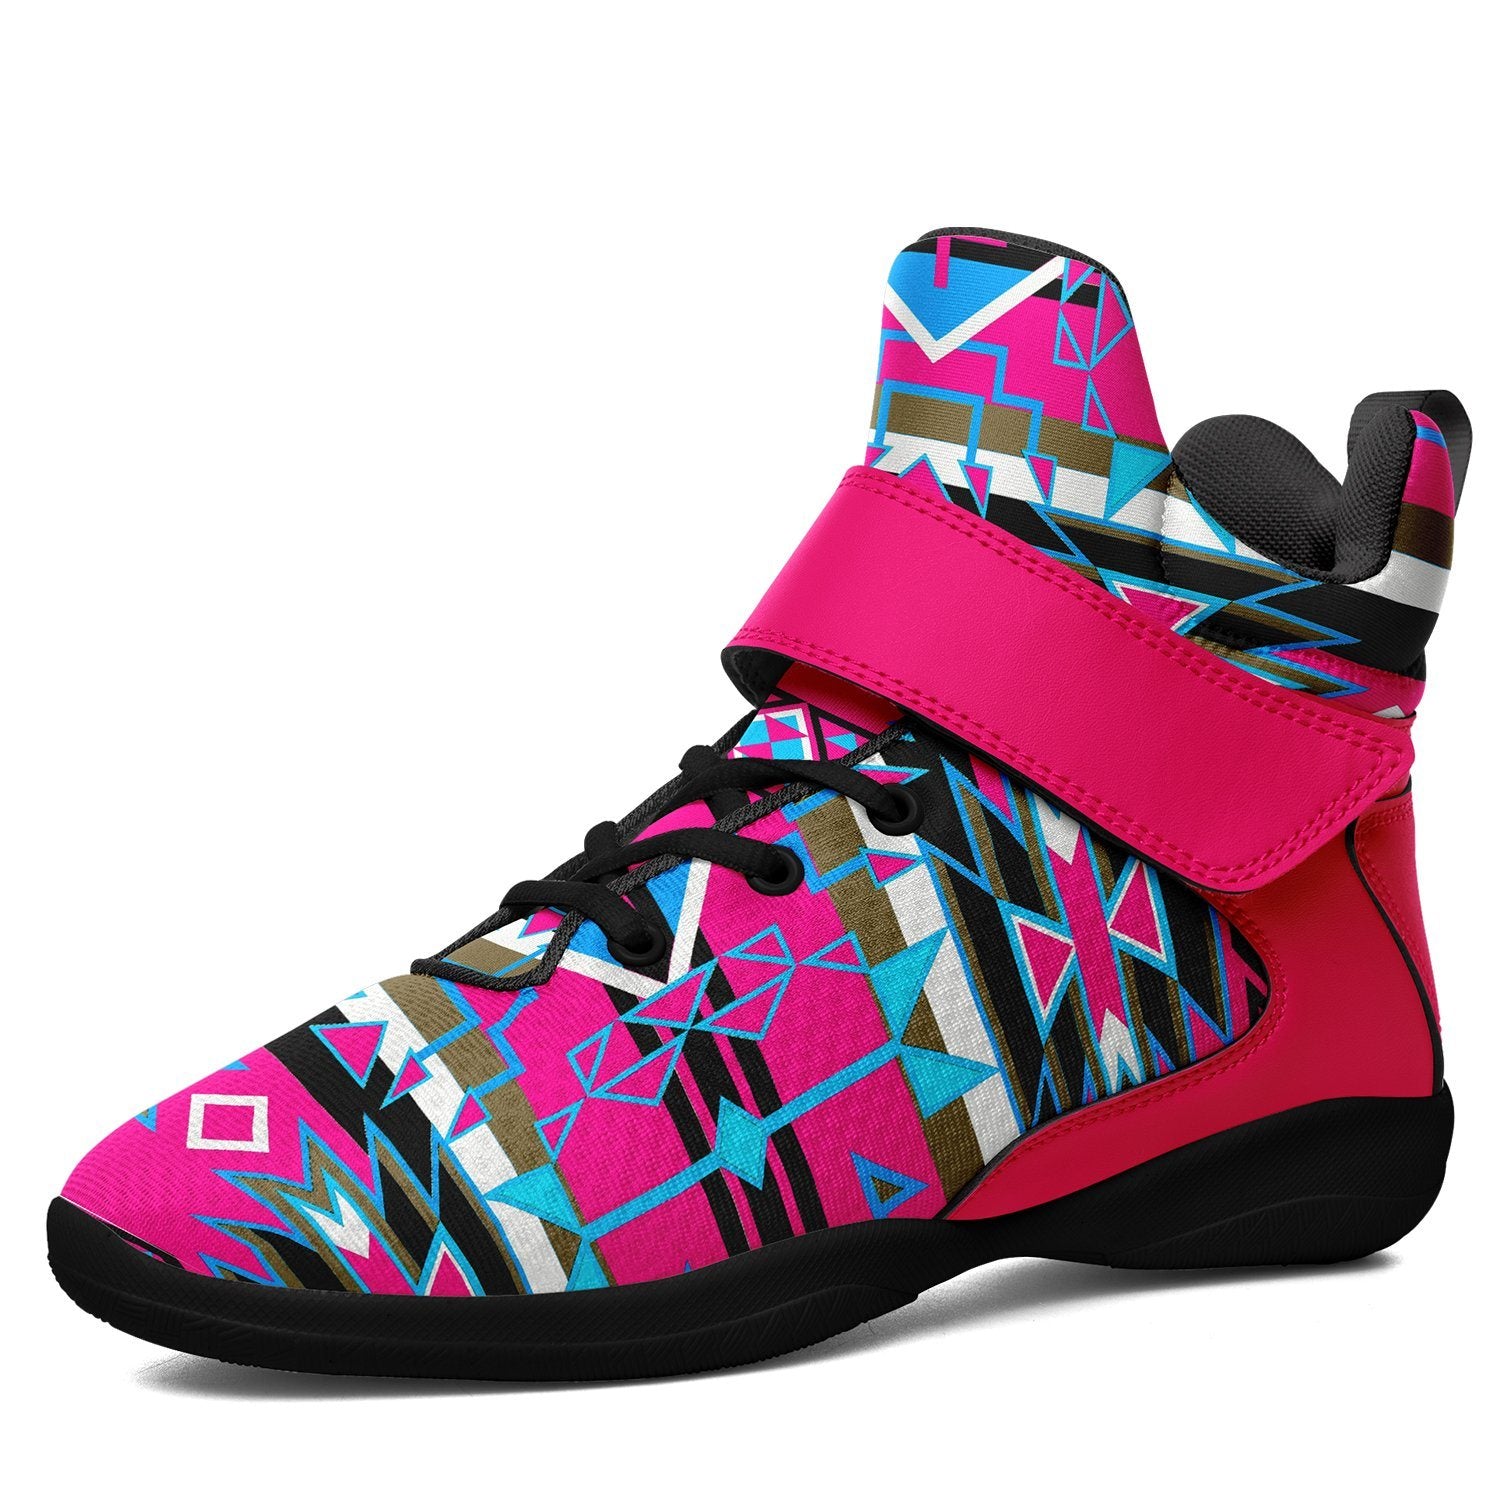 Force of Nature Sunset Storm Ipottaa Basketball / Sport High Top Shoes 49 Dzine US Women 4.5 / US Youth 3.5 / EUR 35 Black Sole with Pink Strap 